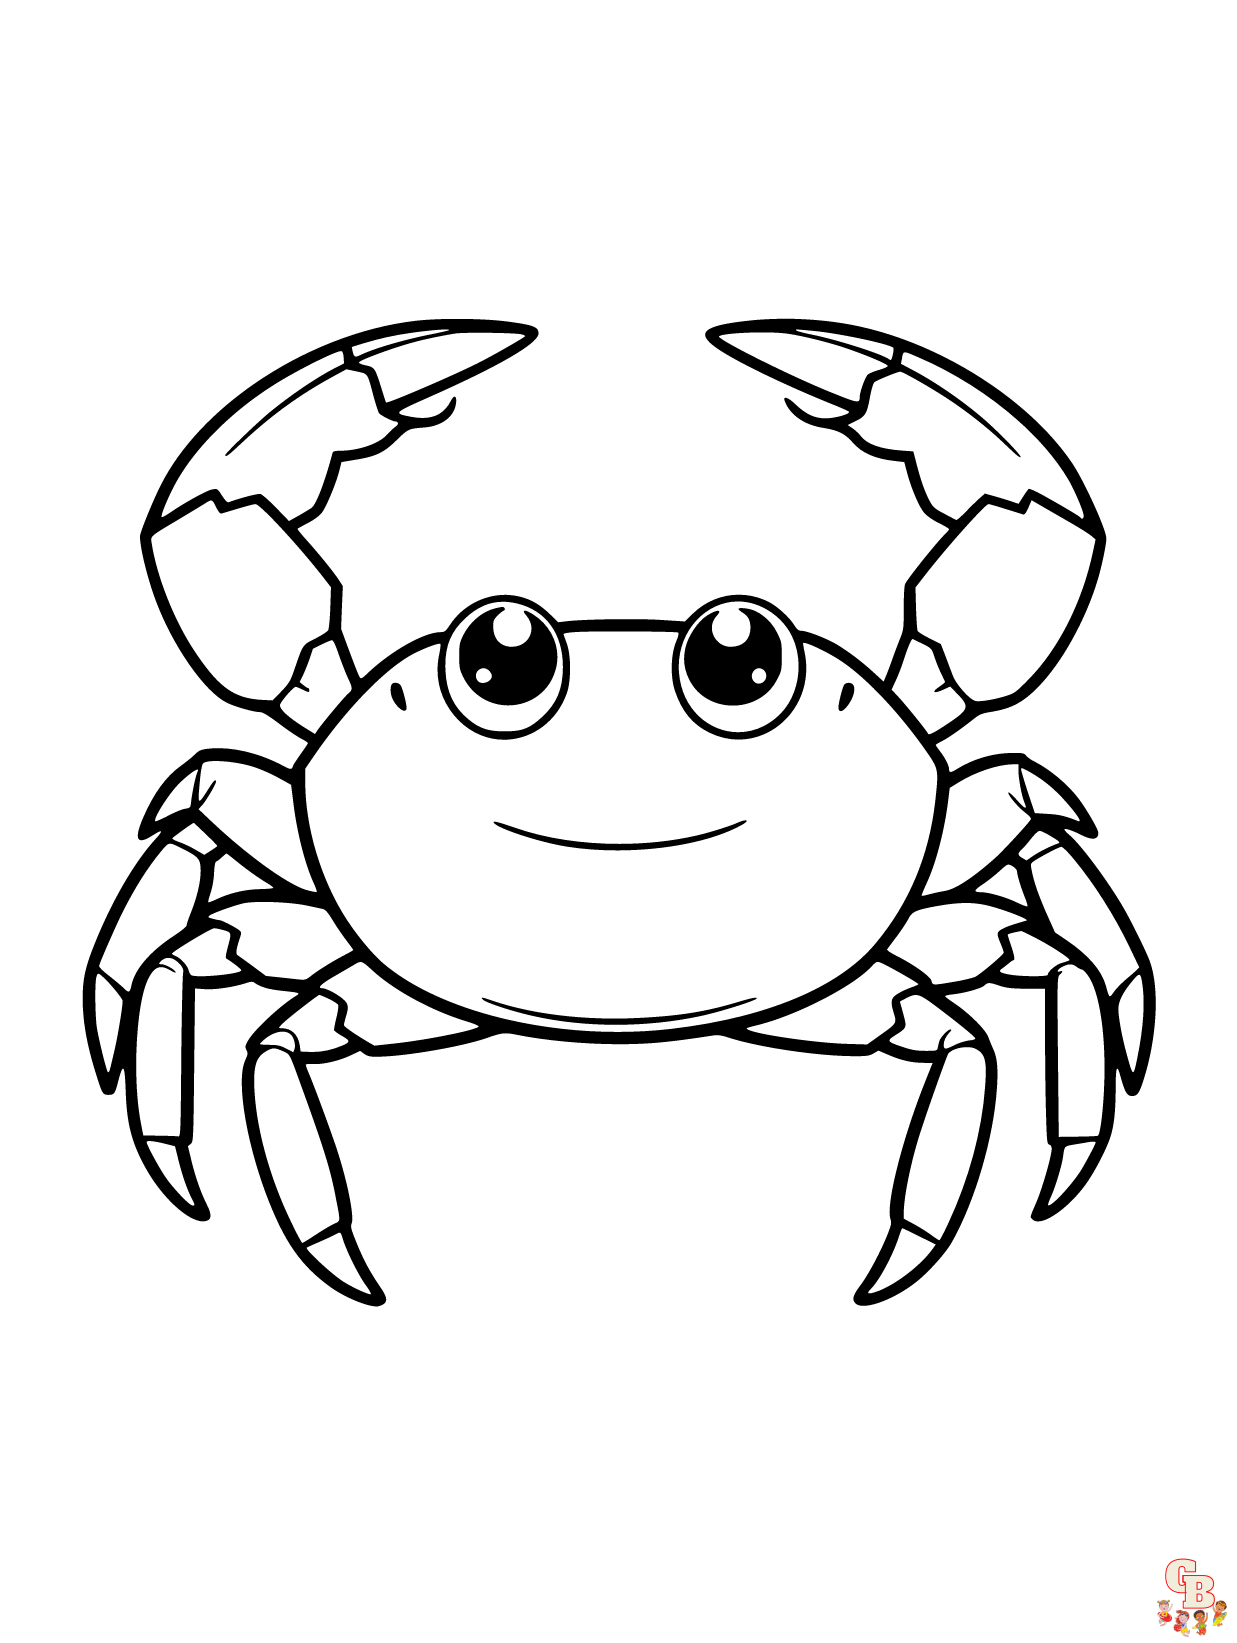 Crab coloring pages printable free